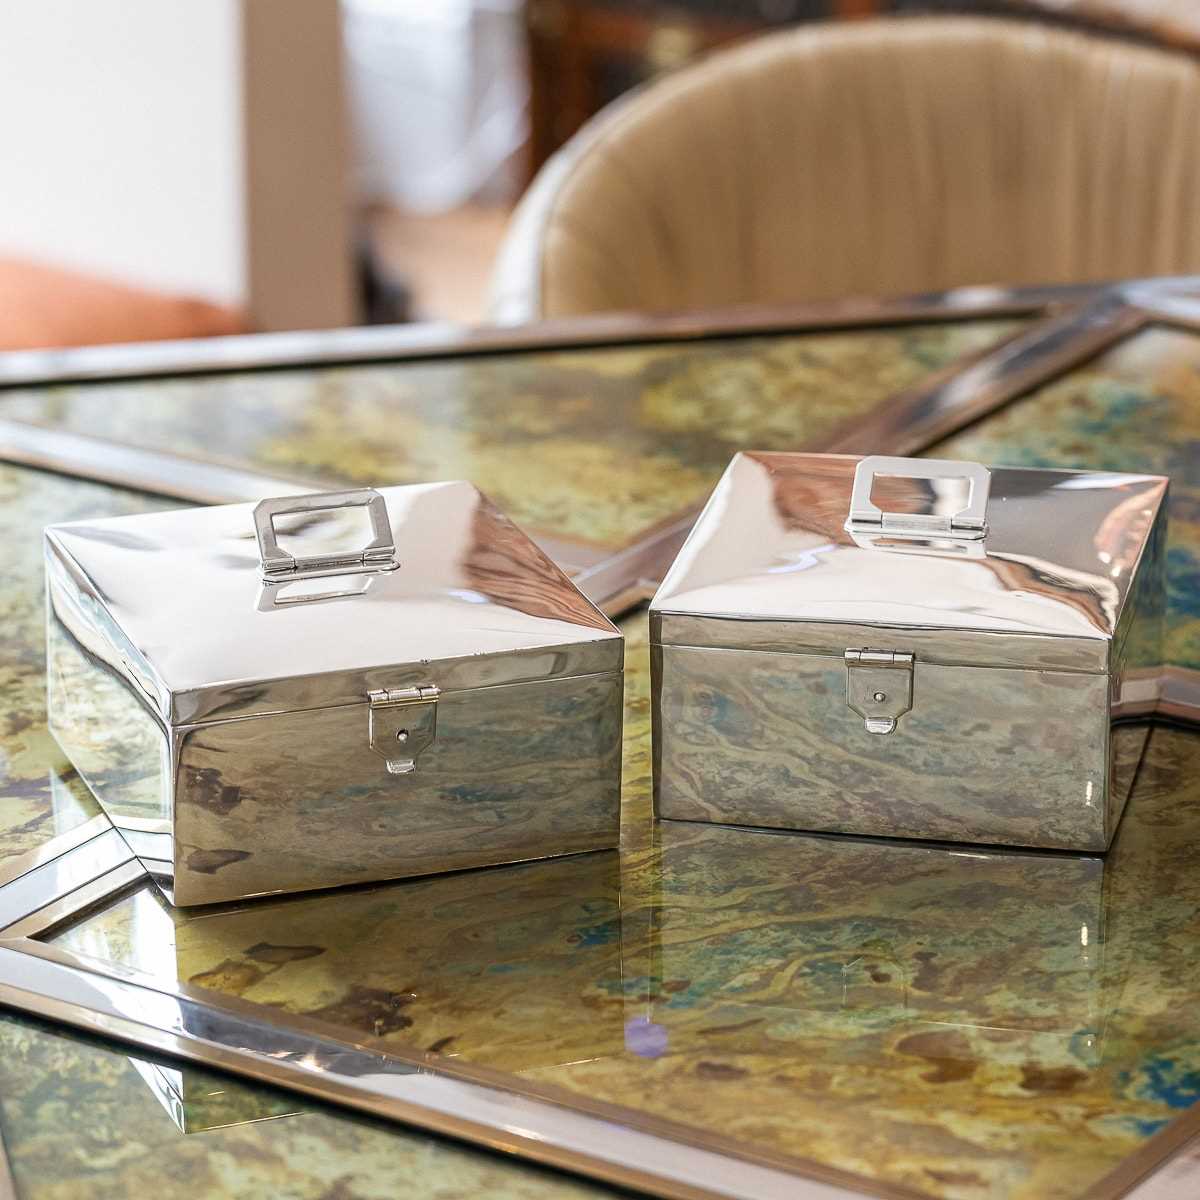 ASPREY & CO. : A PAIR OF STERLING SILVER ART DECO CIGAR BOXES, C. 1936